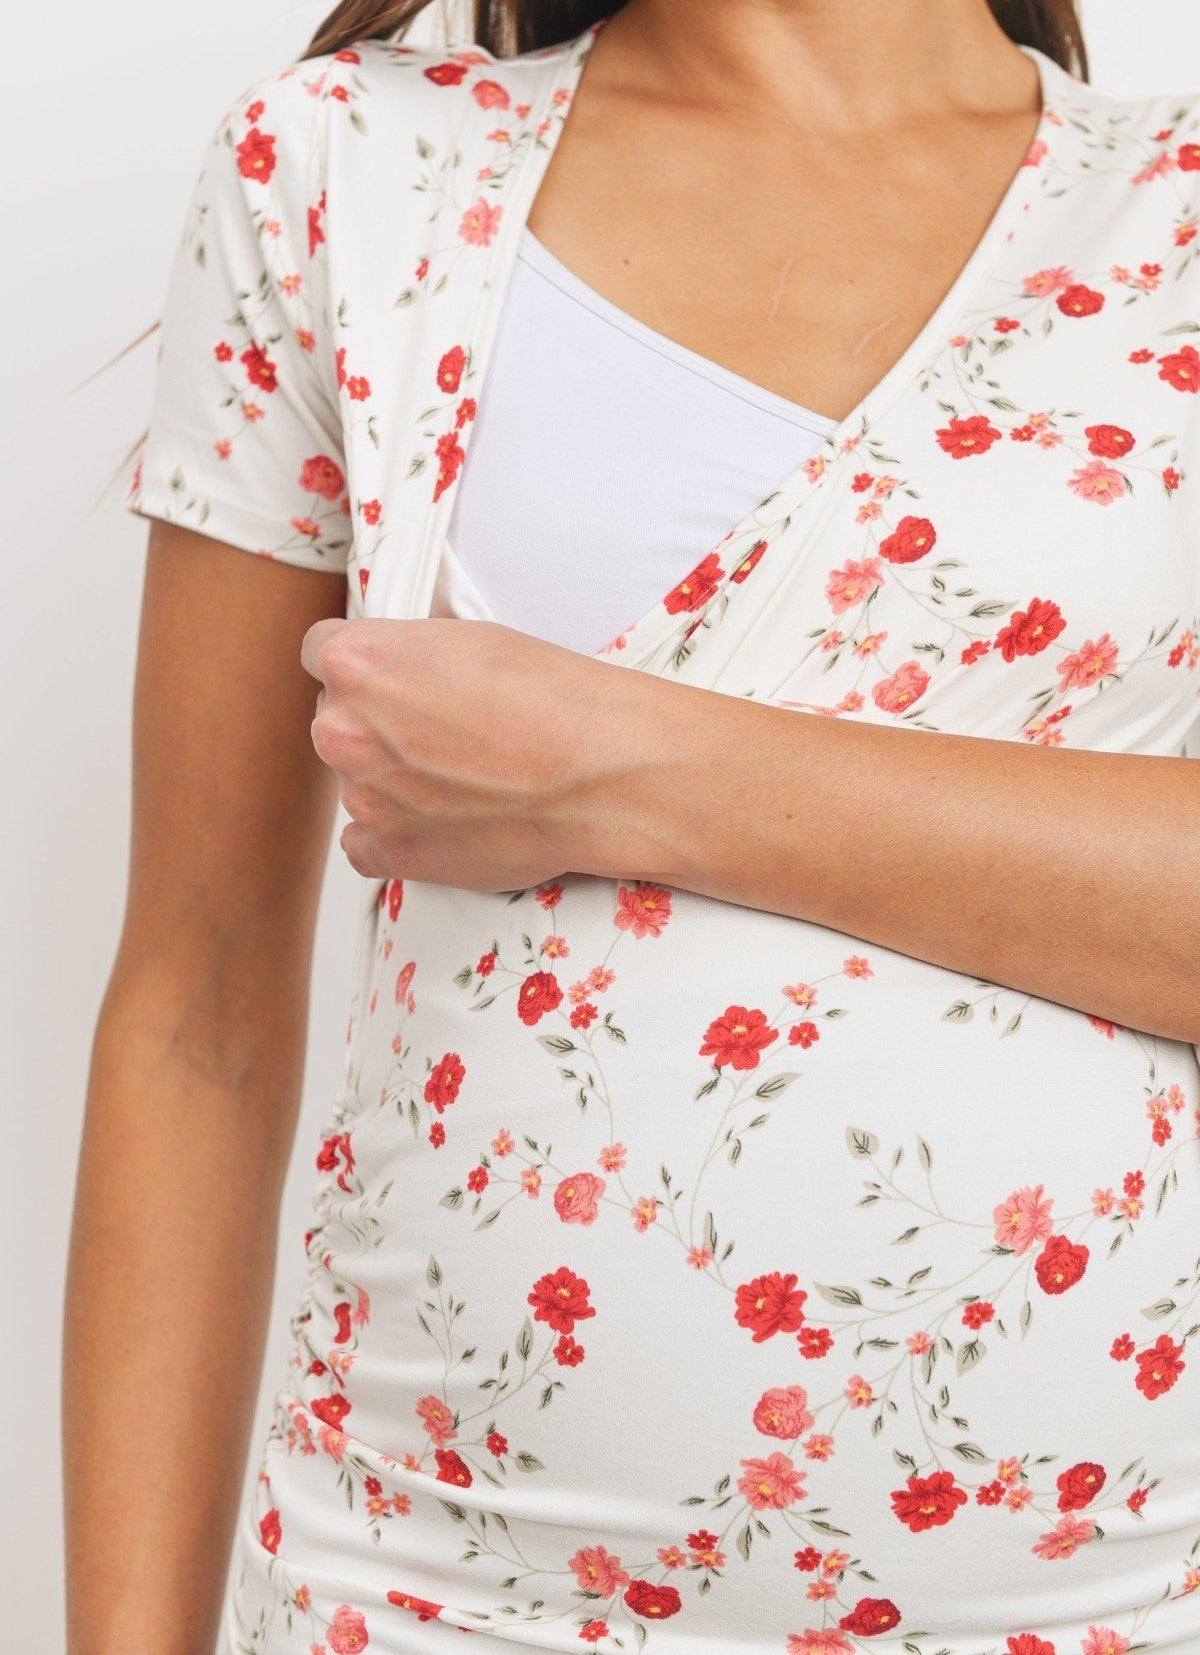 Maternity Wrap Top - Perfect for nursing moms